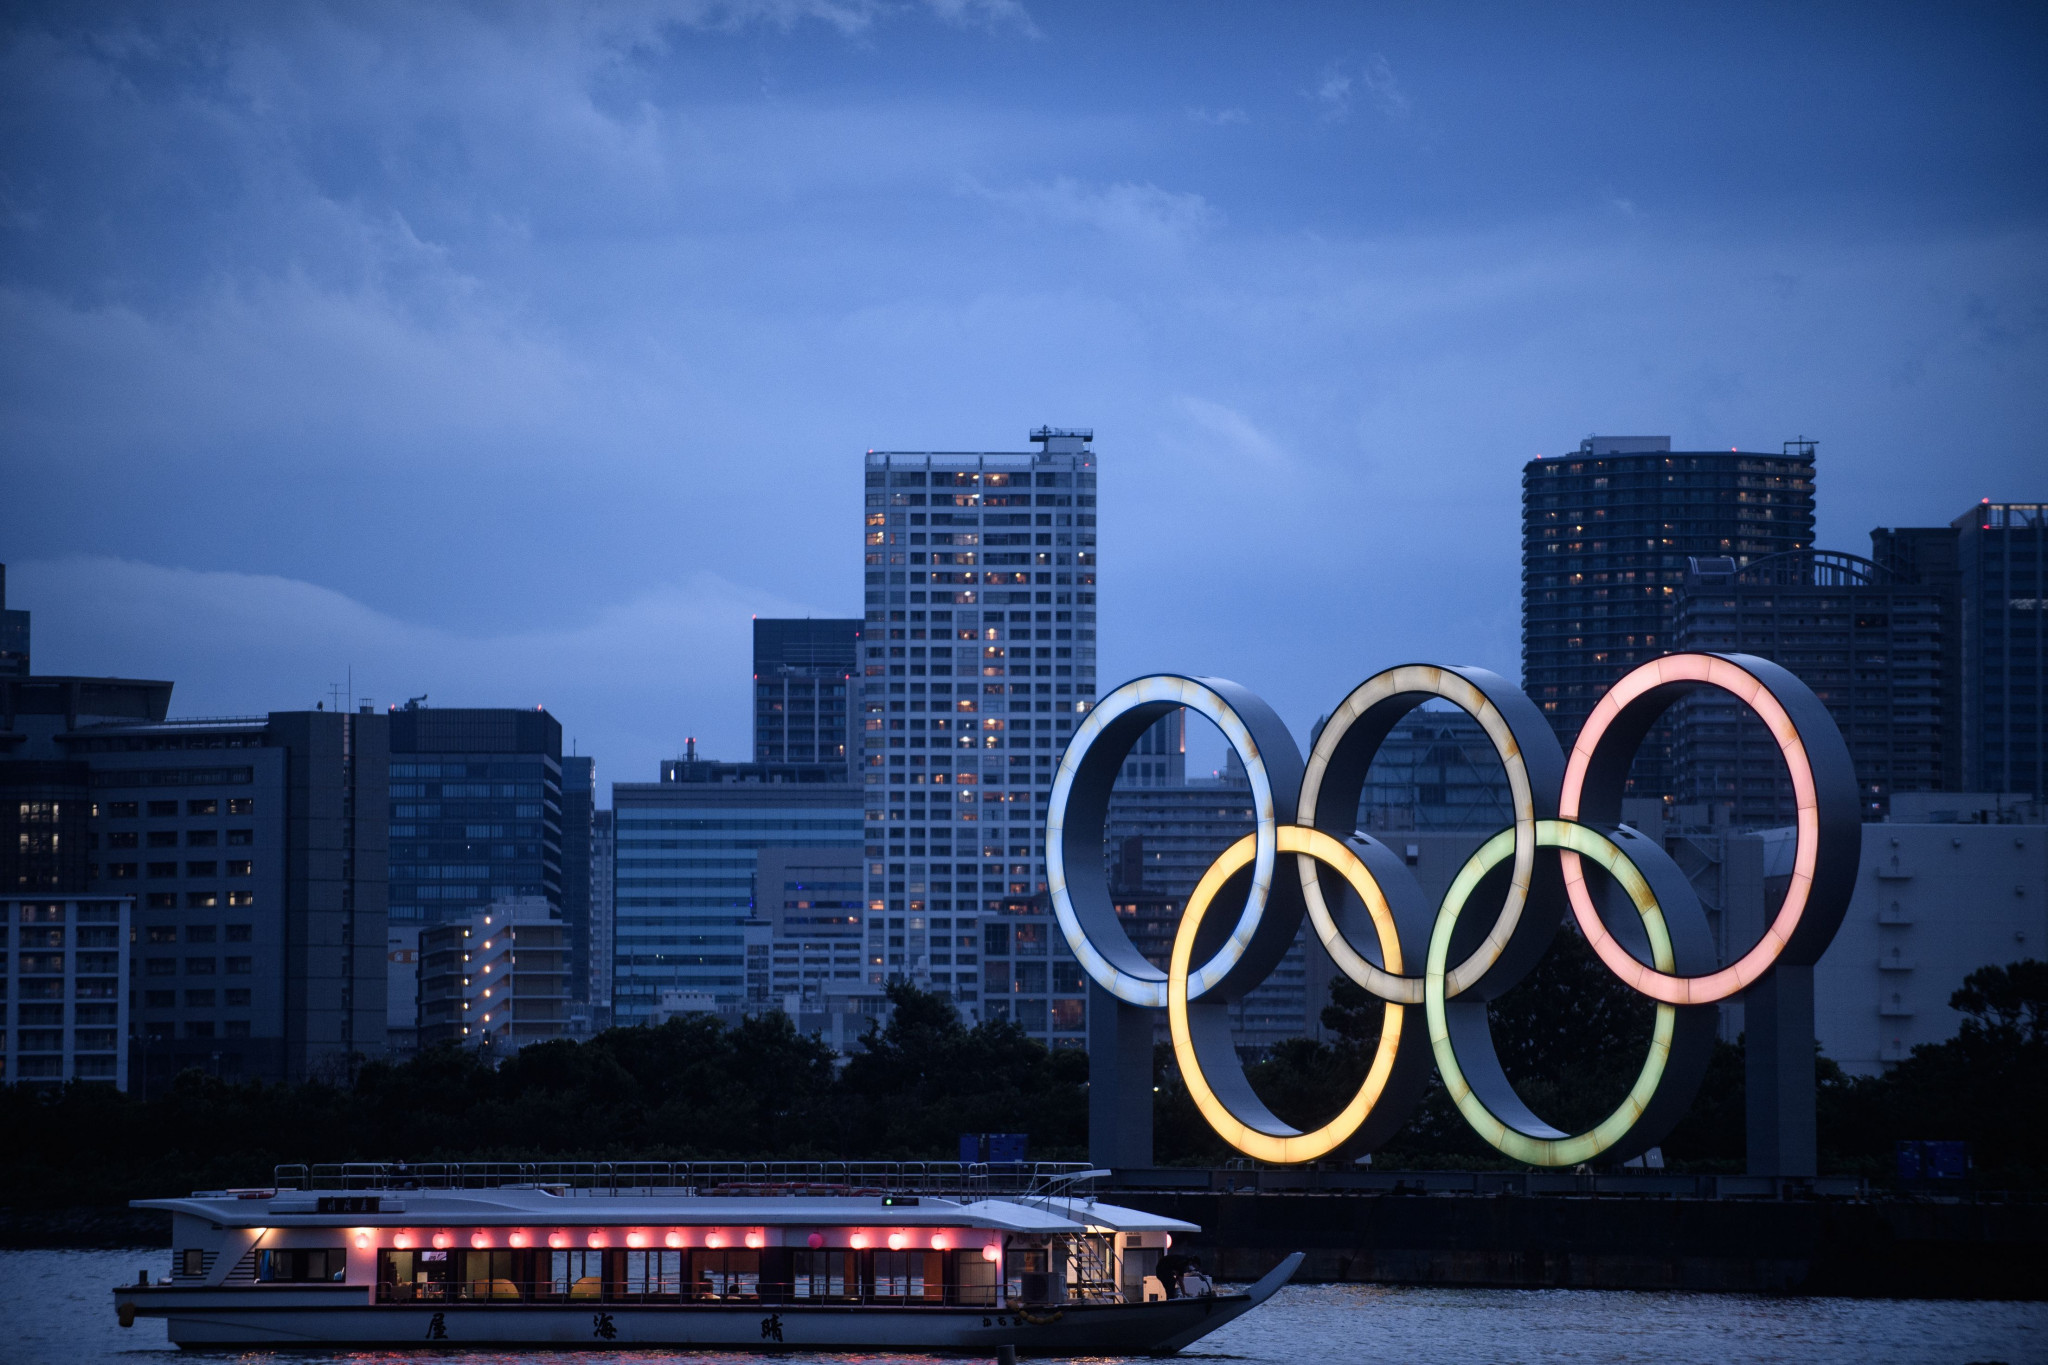 Tokyo 2020 expected to dominate discussions at IOC Executive Board meeting